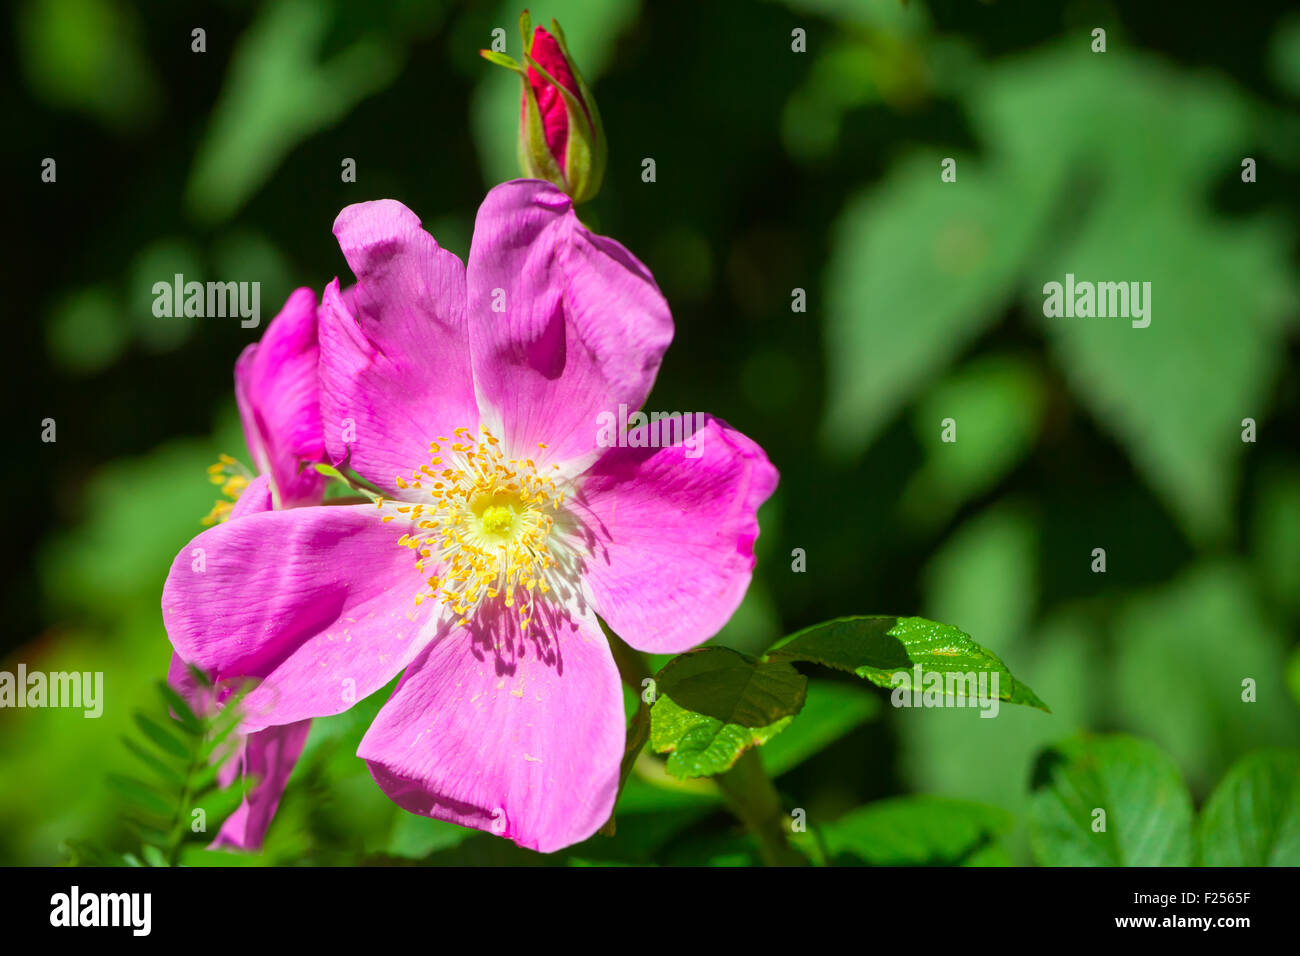 Bright pink wild dog-rose flower macro photo with selective focus Stock Photo